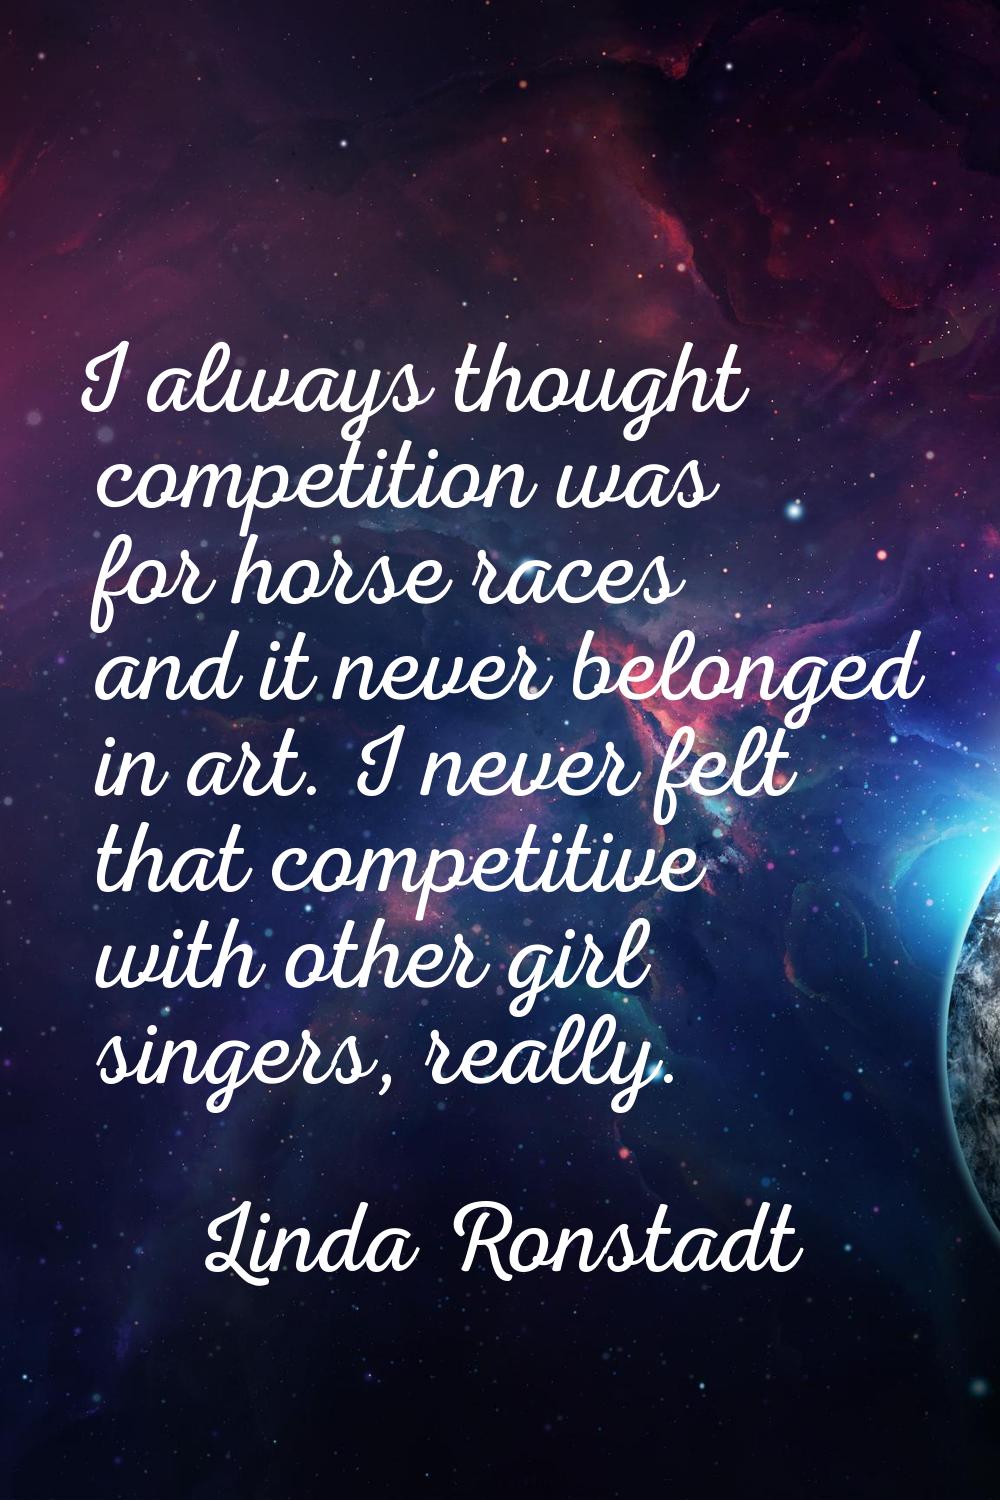 I always thought competition was for horse races and it never belonged in art. I never felt that co